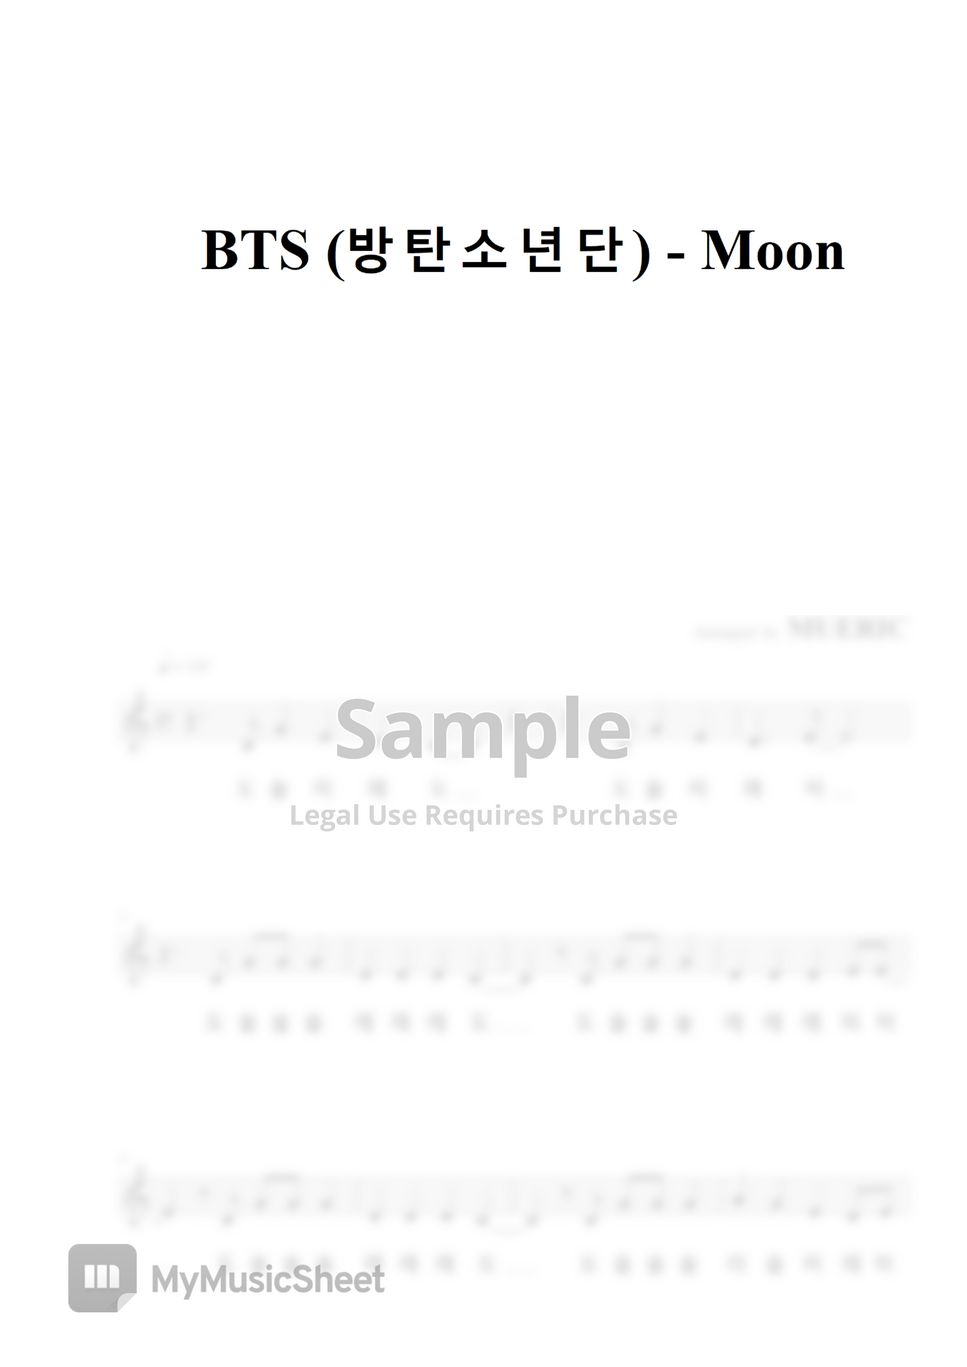 BTS - MOON (Recorder ver.) by MUERIC